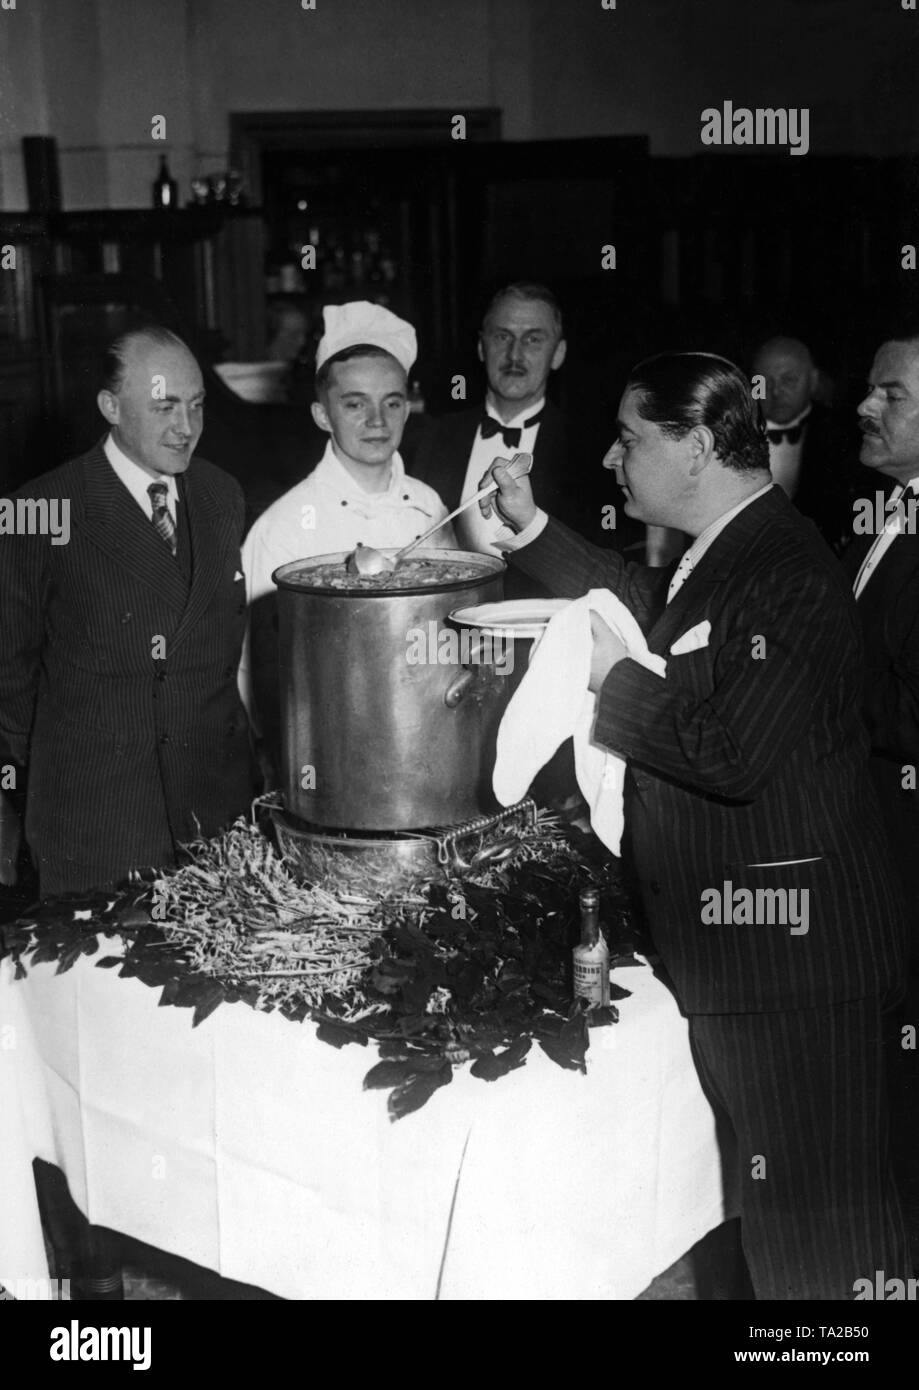 Nazi propaganda measure for the Winter Relief: On the 'Eintopfsonntag' (stew-Sunday), even in high-end restaurants like the Horcher only stew could be served. Stock Photo